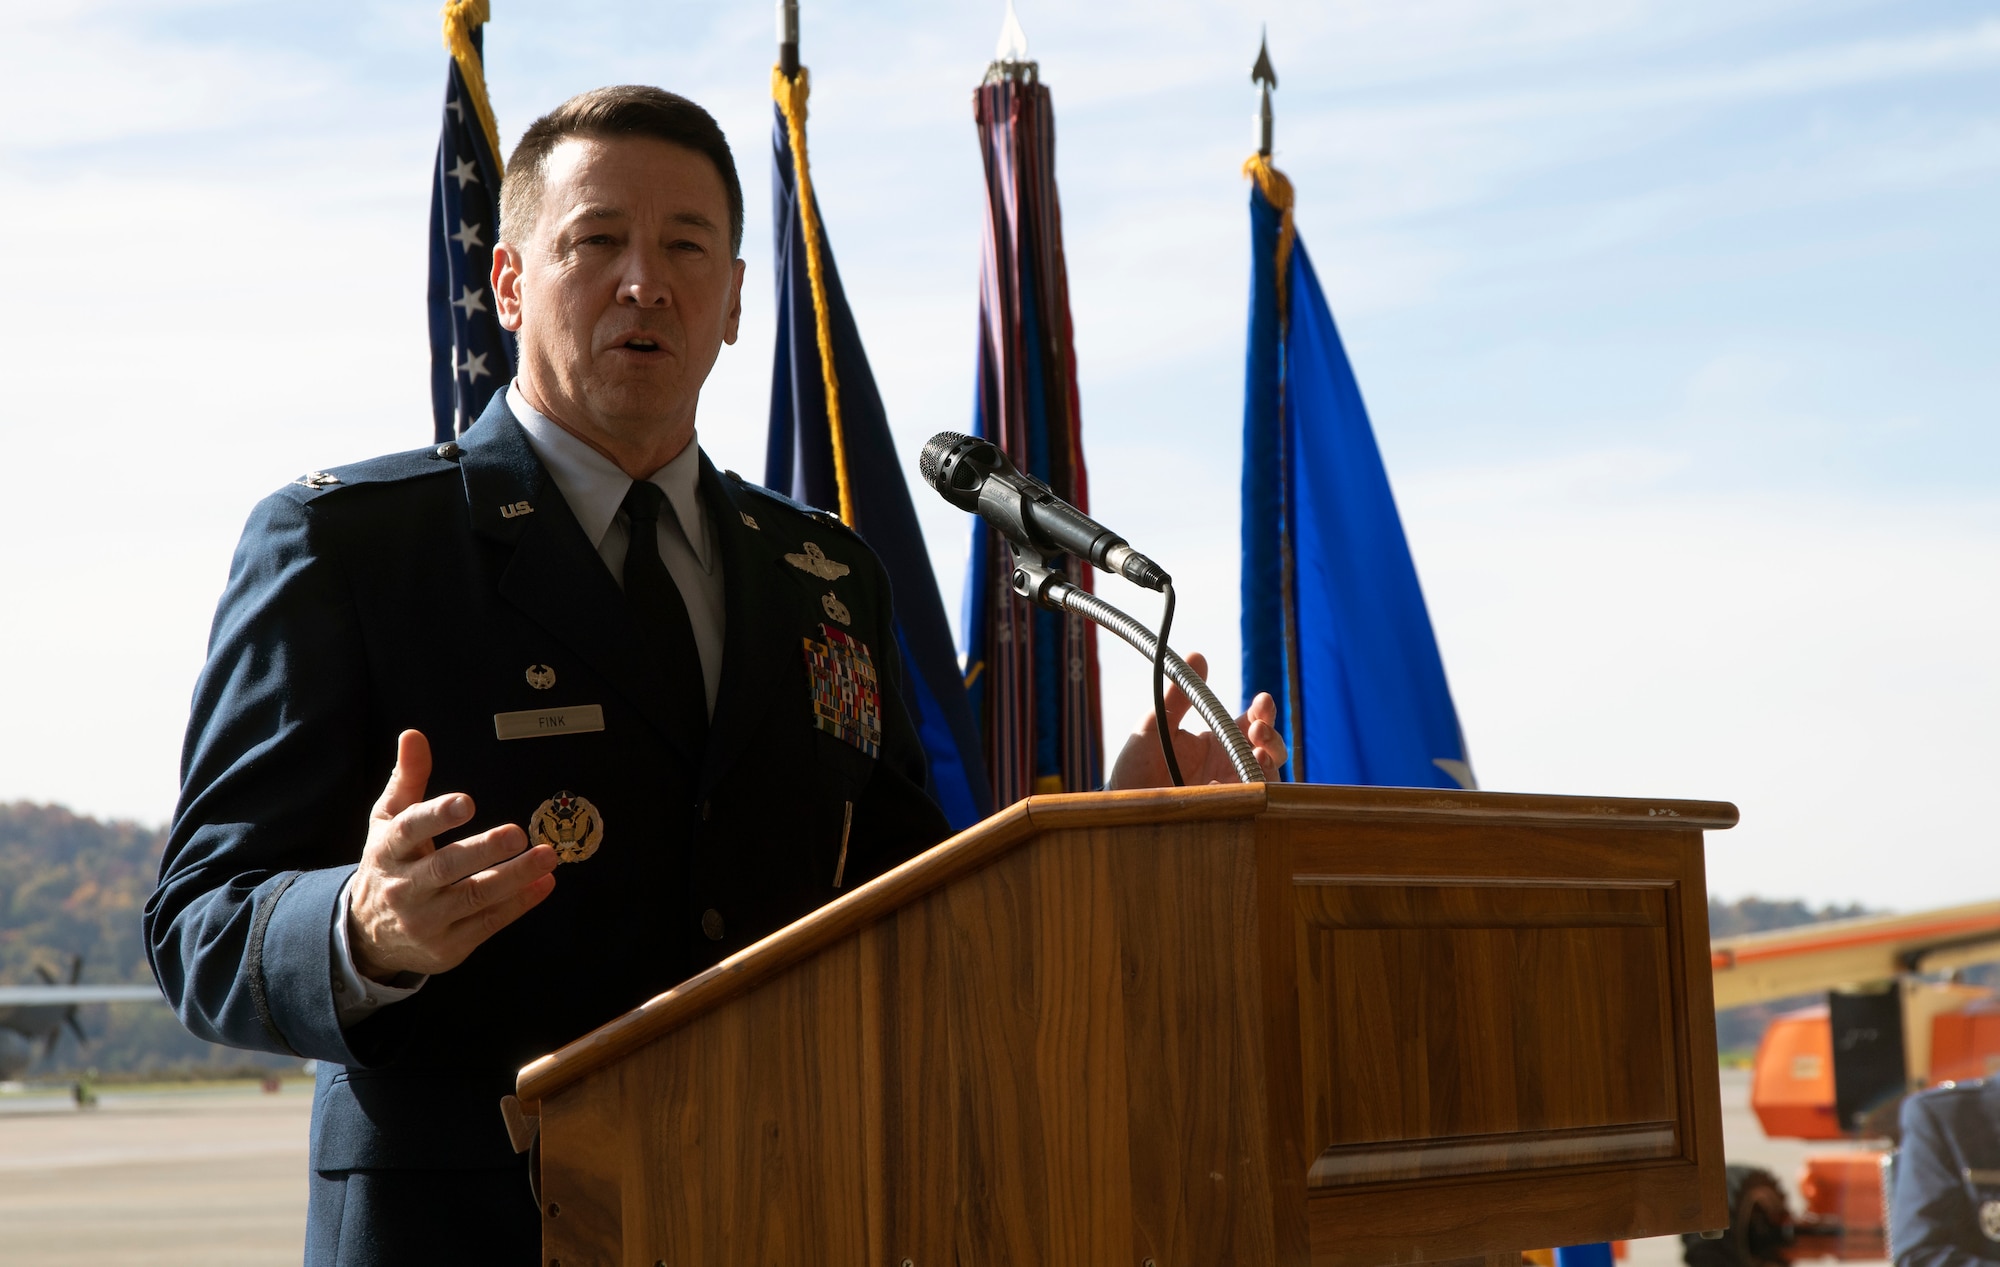 Col. Edward Fink Jr., 193rd Special Operations Wing commander, delivers remarks to attendees during a 193 SOW assumption of command ceremony Oct. 28, 2022, Middletown, Pennsylvania.